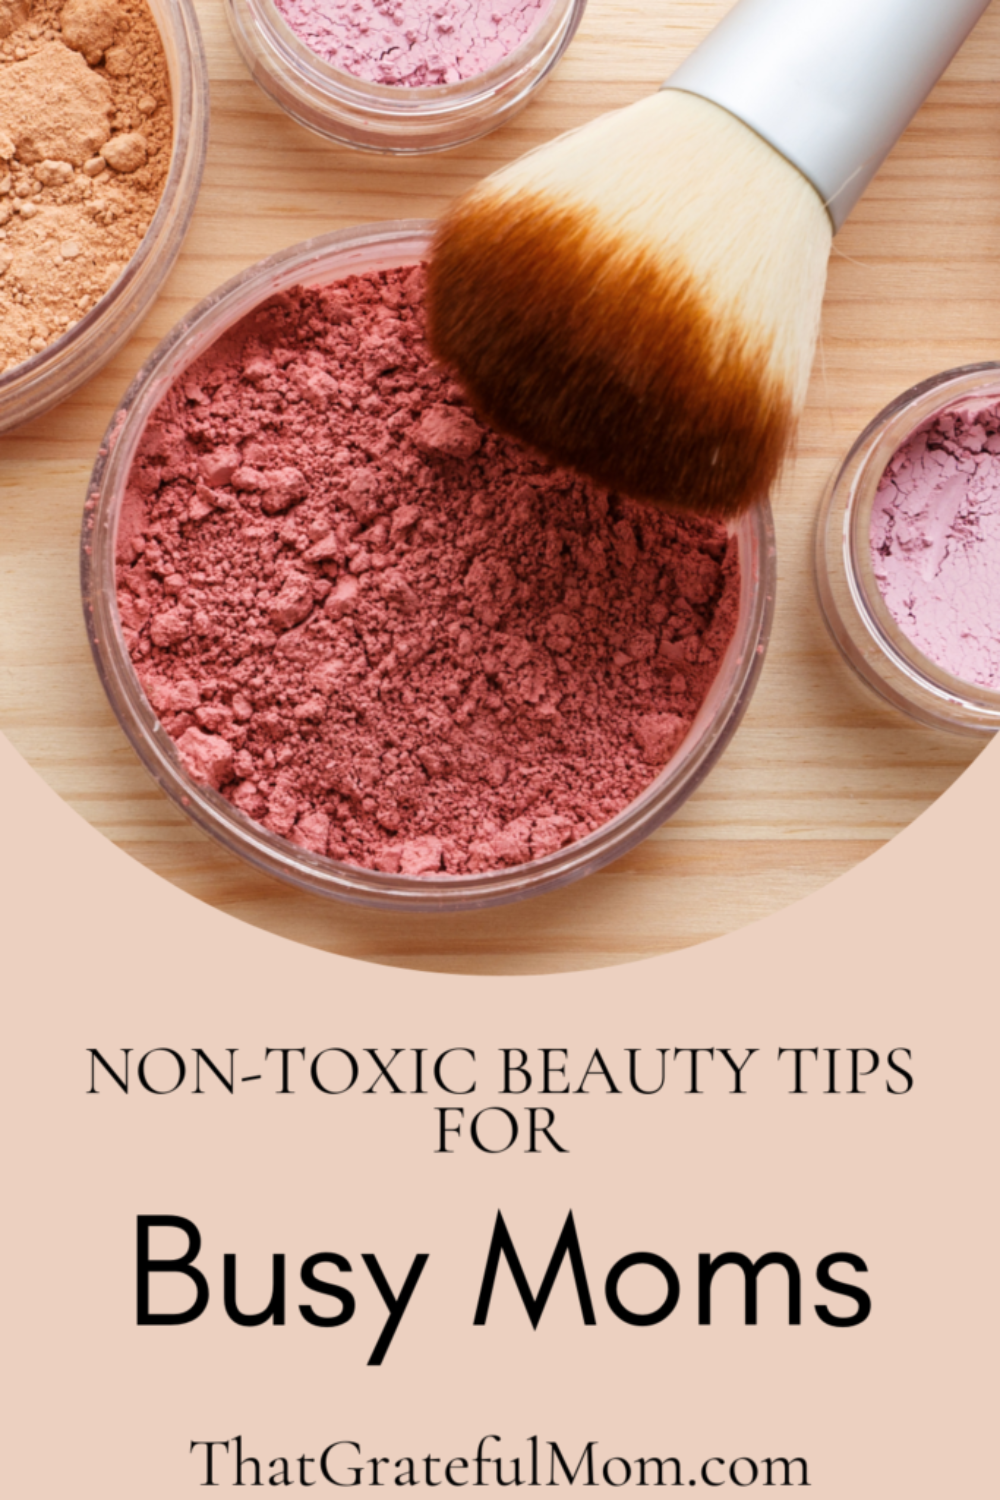 Non-toxic beauty tips for busy moms pin 2